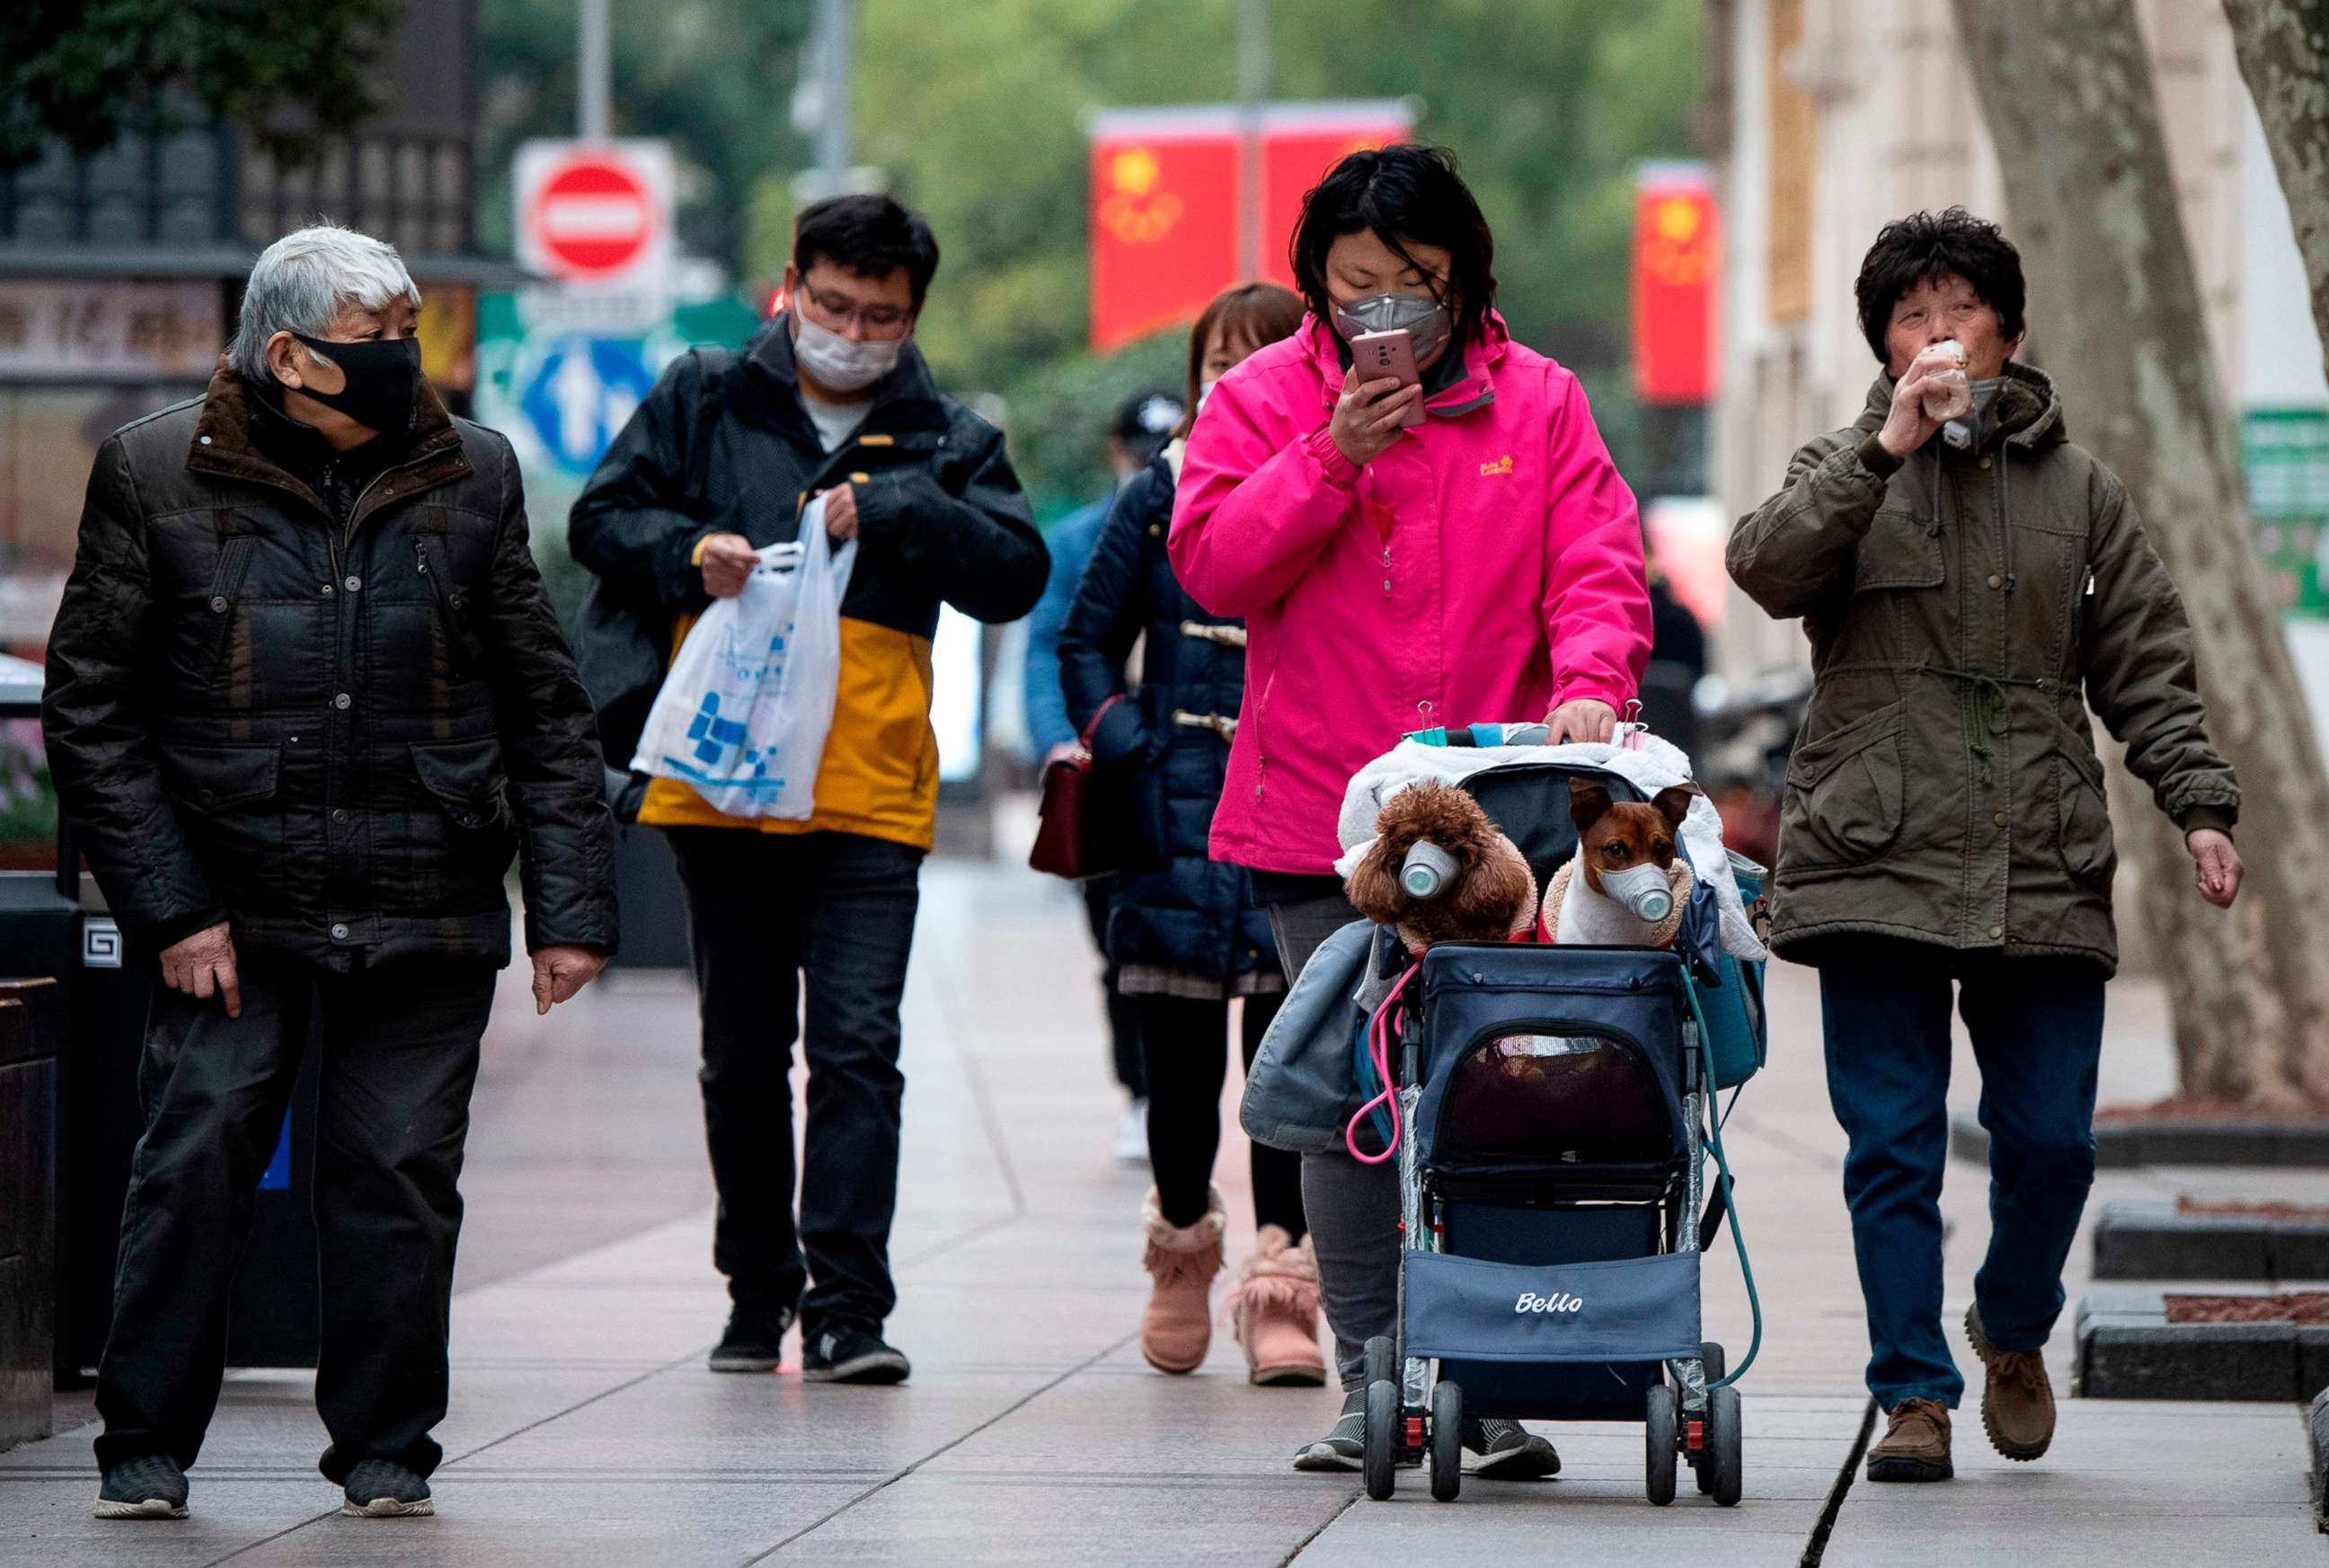 PHOTO: A woman wearing a protective facemask pushes a stroller with two dogs wearing masks along a street in Shanghai on Feb. 19, 2020.